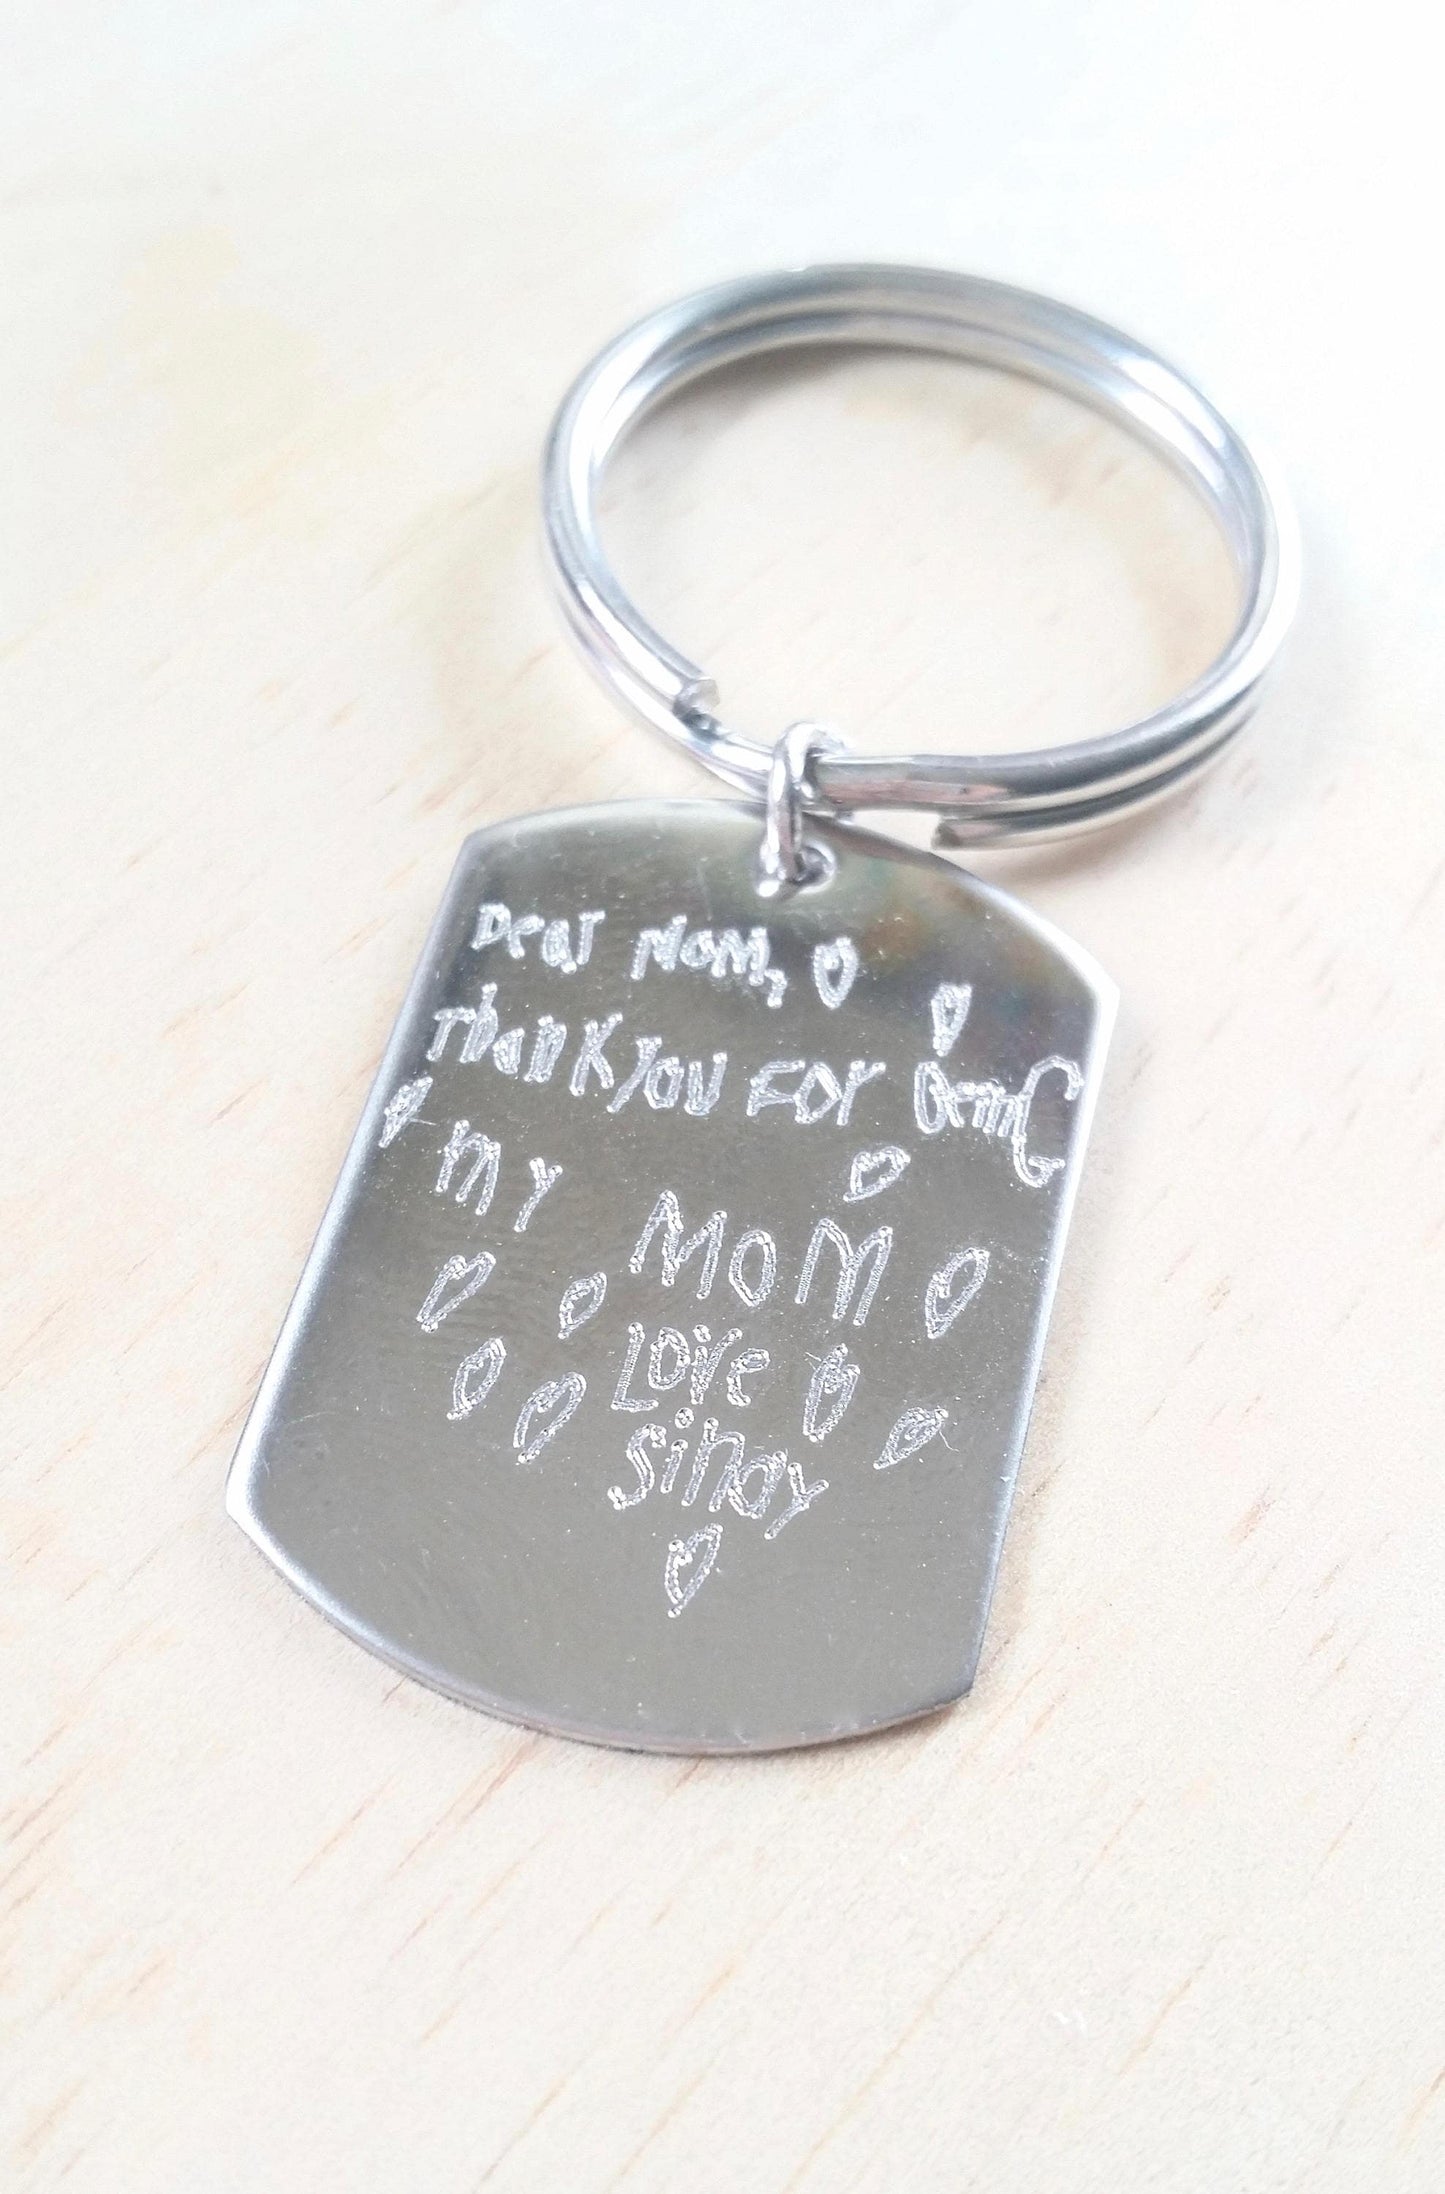 Handwriting keychain, Personalized Engraved keychain in silver